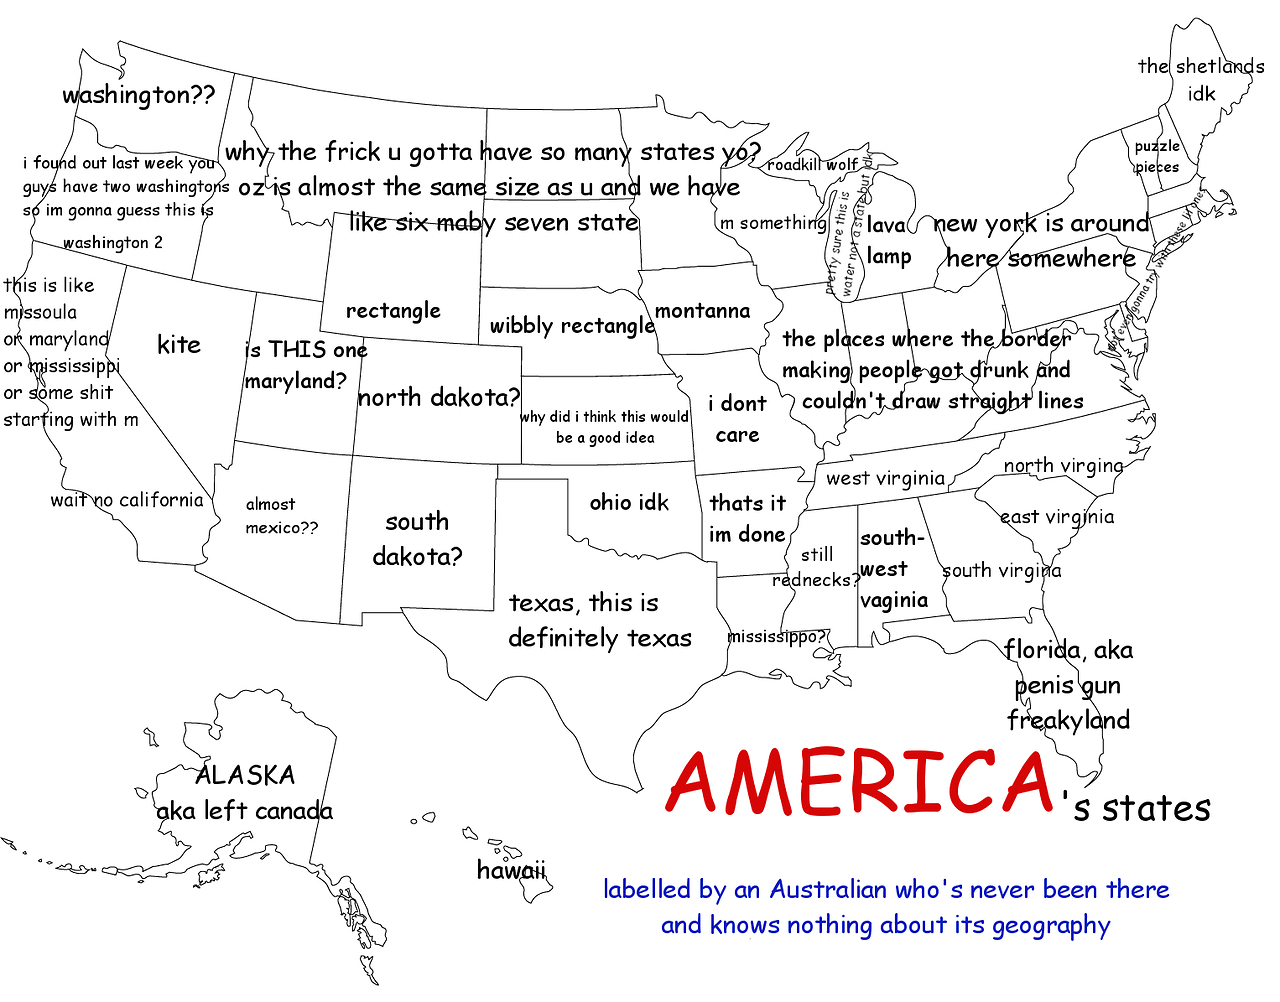 The US as labeled by an Aussie